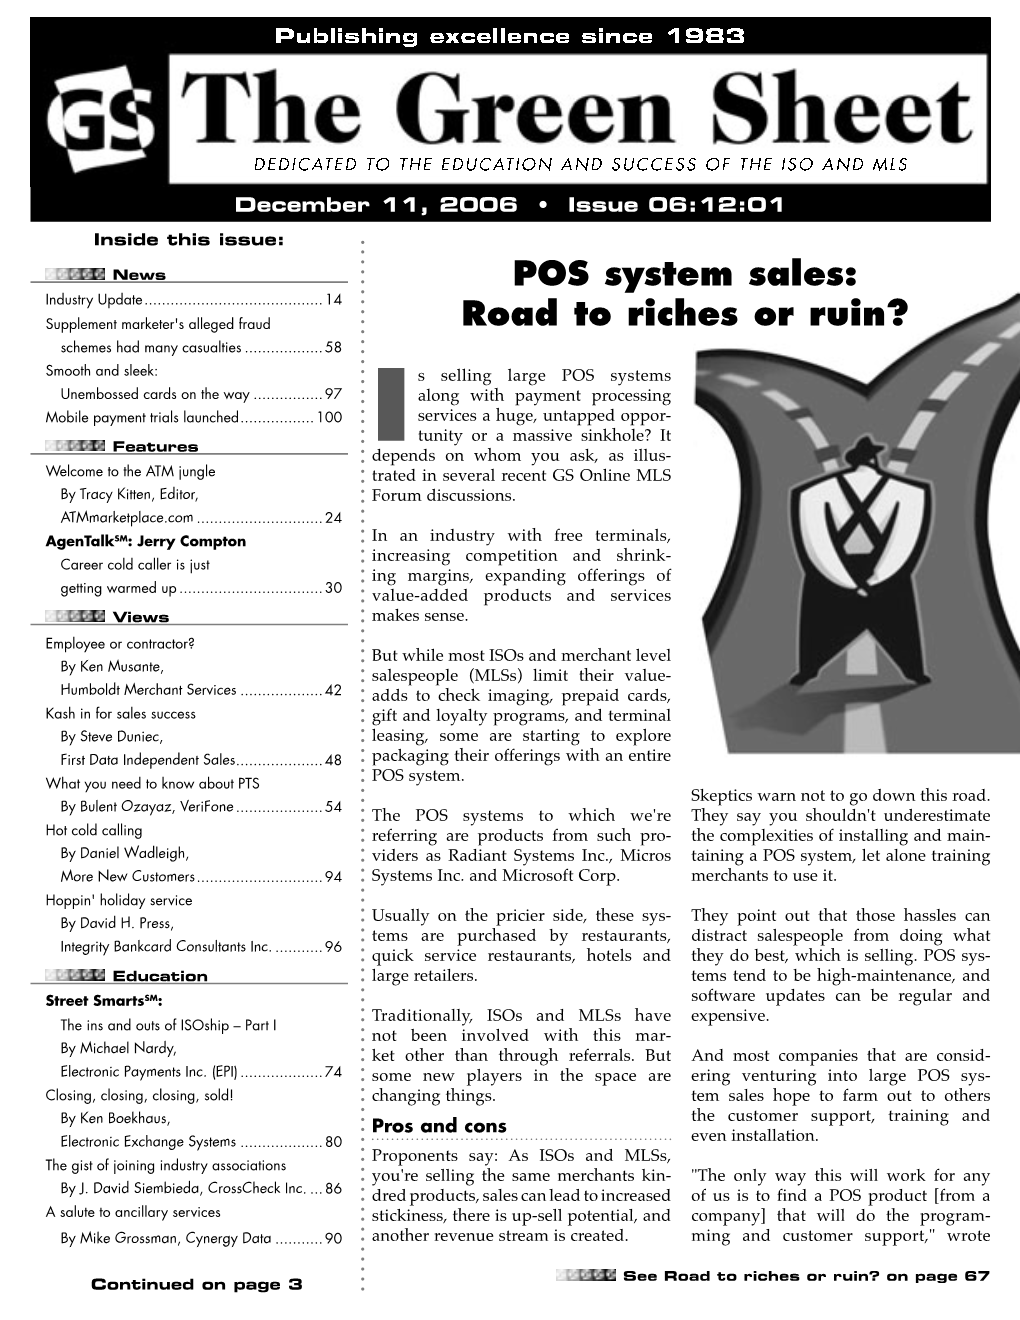 POS System Sales: Industry Update